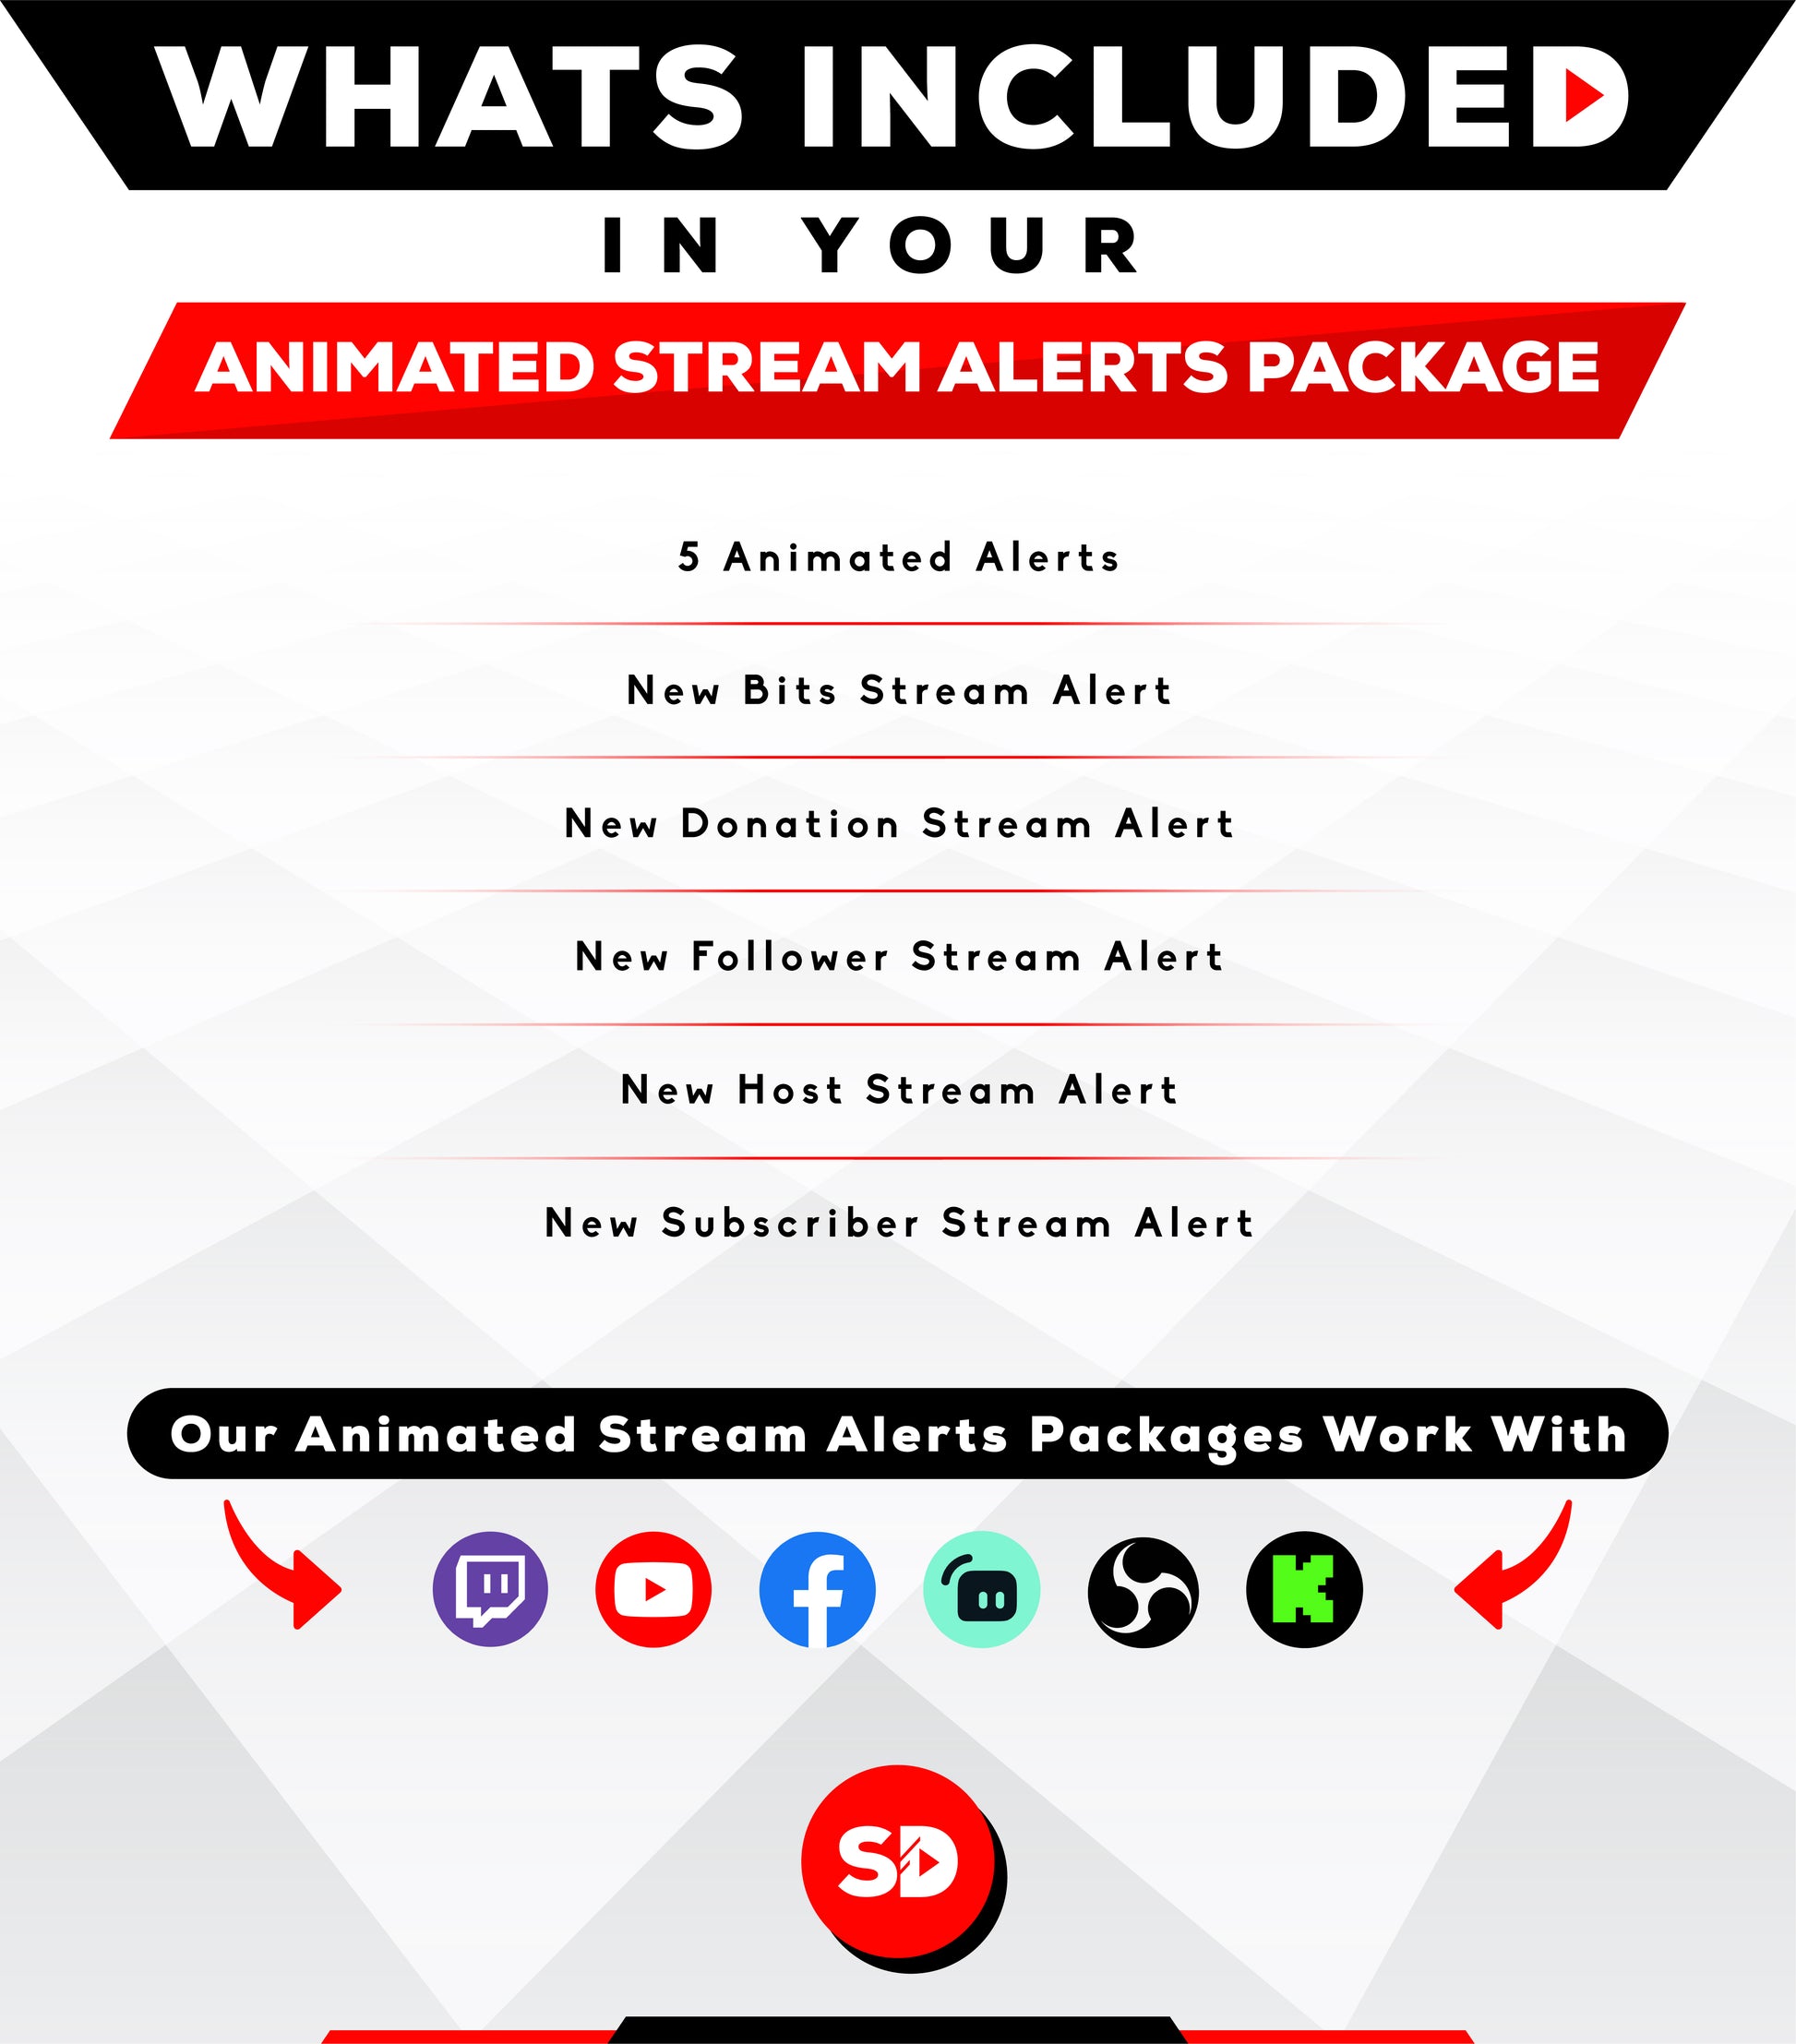 Whats included in your package - Alerts - Happy new year